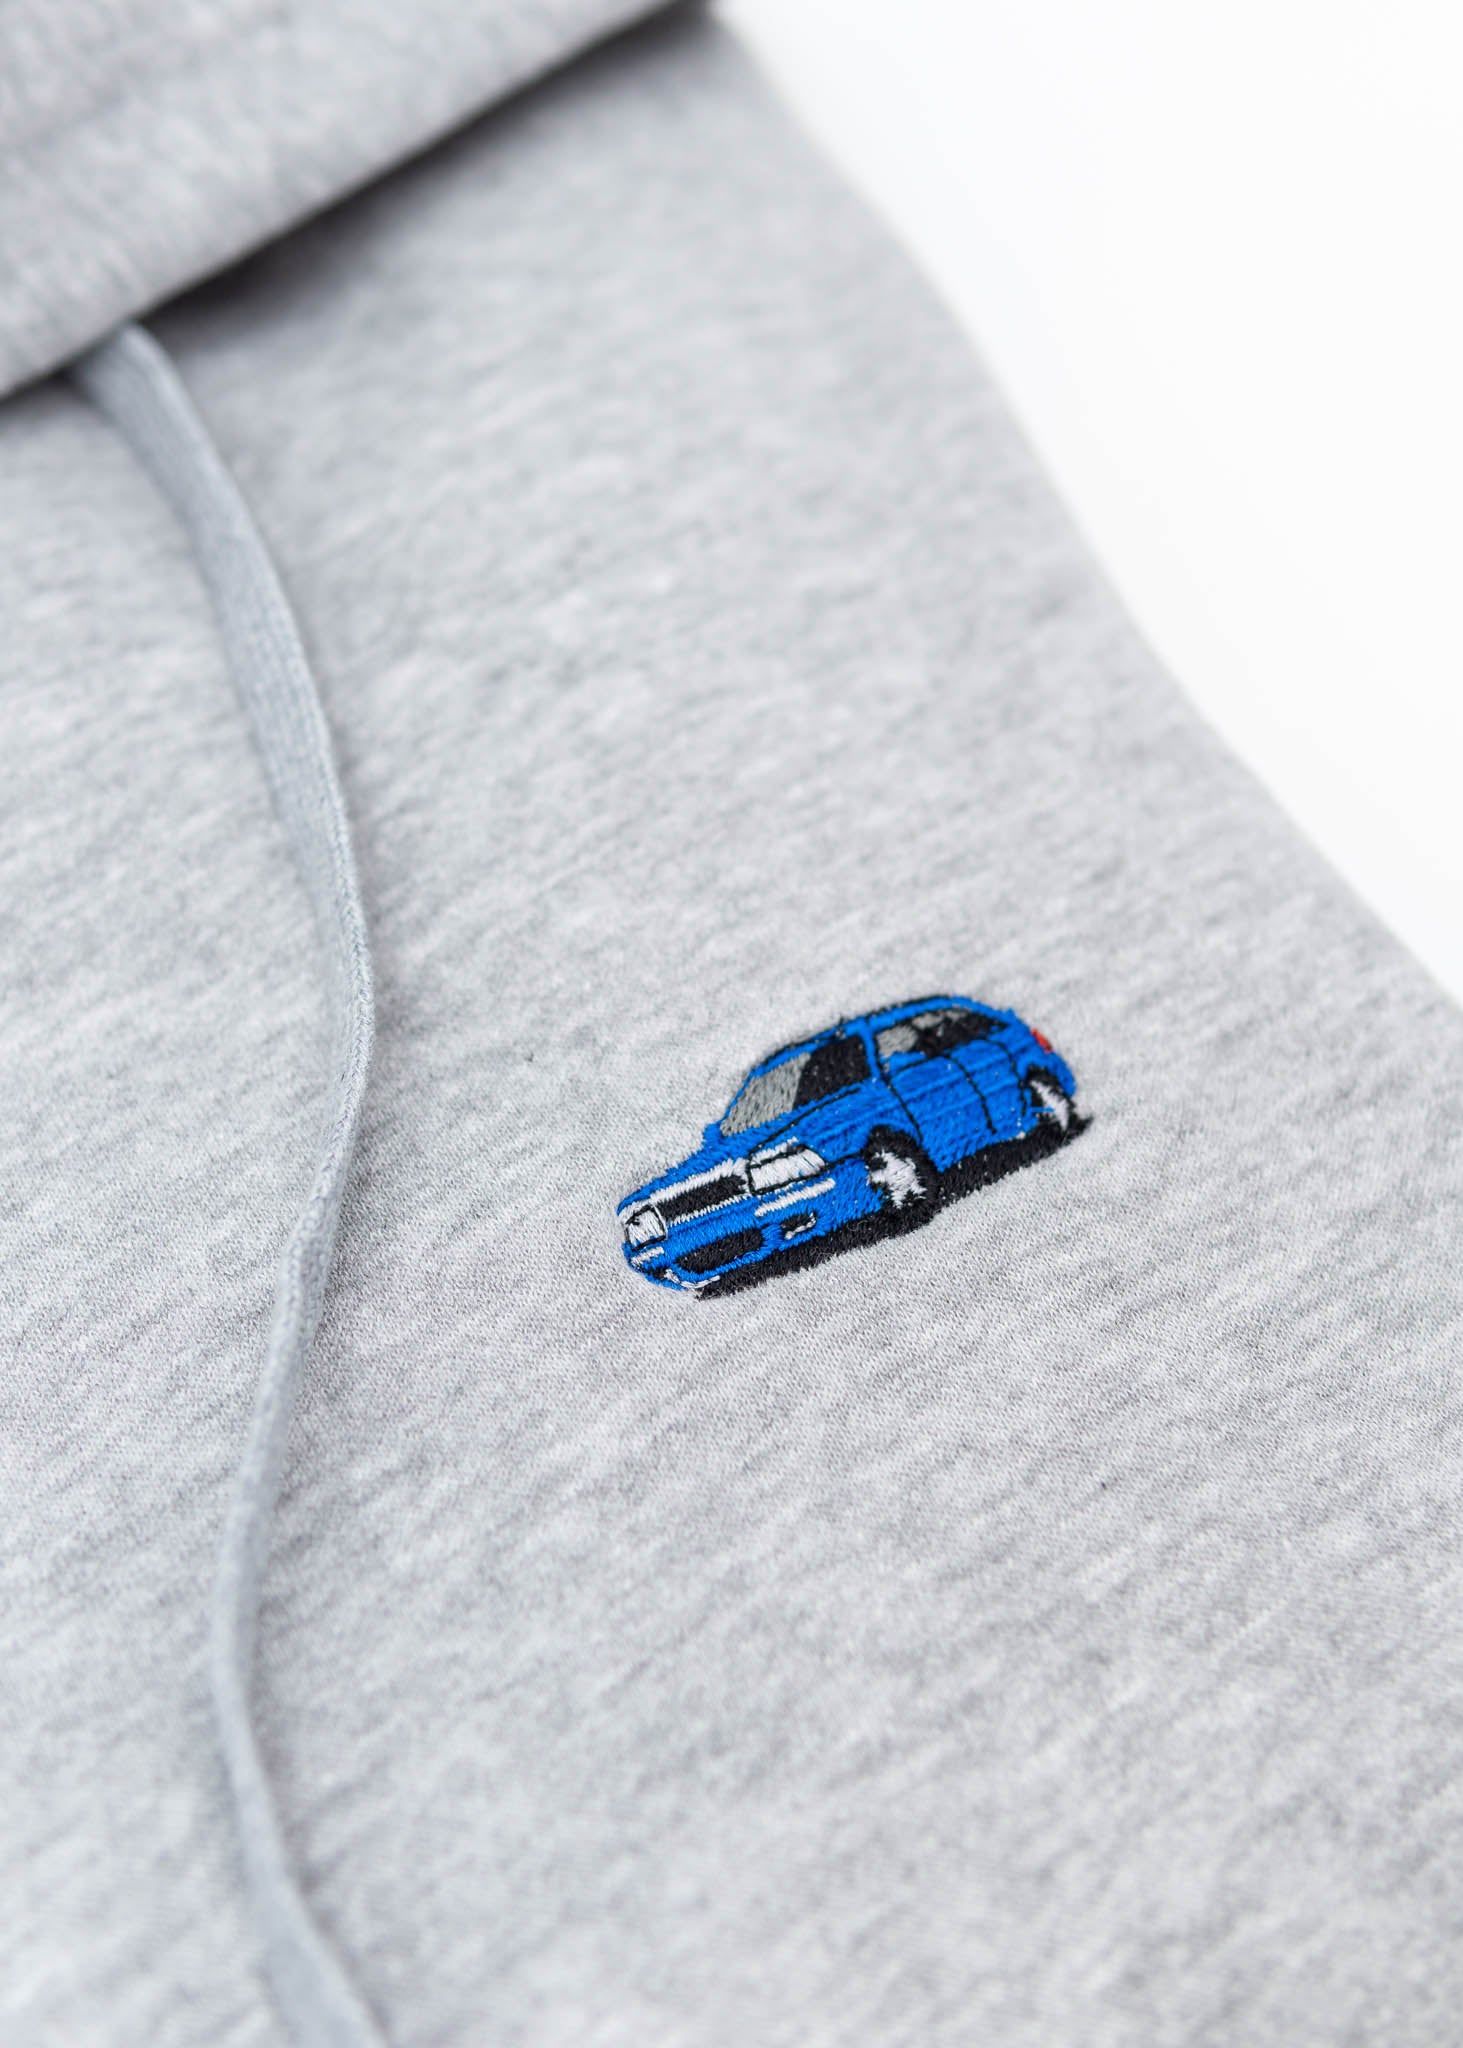 A grey Audi unisex hoodie for men and women. Photo is a close up view of the sweater with an embroidered Nogaro Blue Audi 80 RS2 Avant made by Porsche. Fabric composition is cotton, polyester, and rayon. The material is very soft, stretchy, and non-transparent. The style of this hoodie is long sleeve, crewneck with a hood, hooded, with embroidery on the left chest.